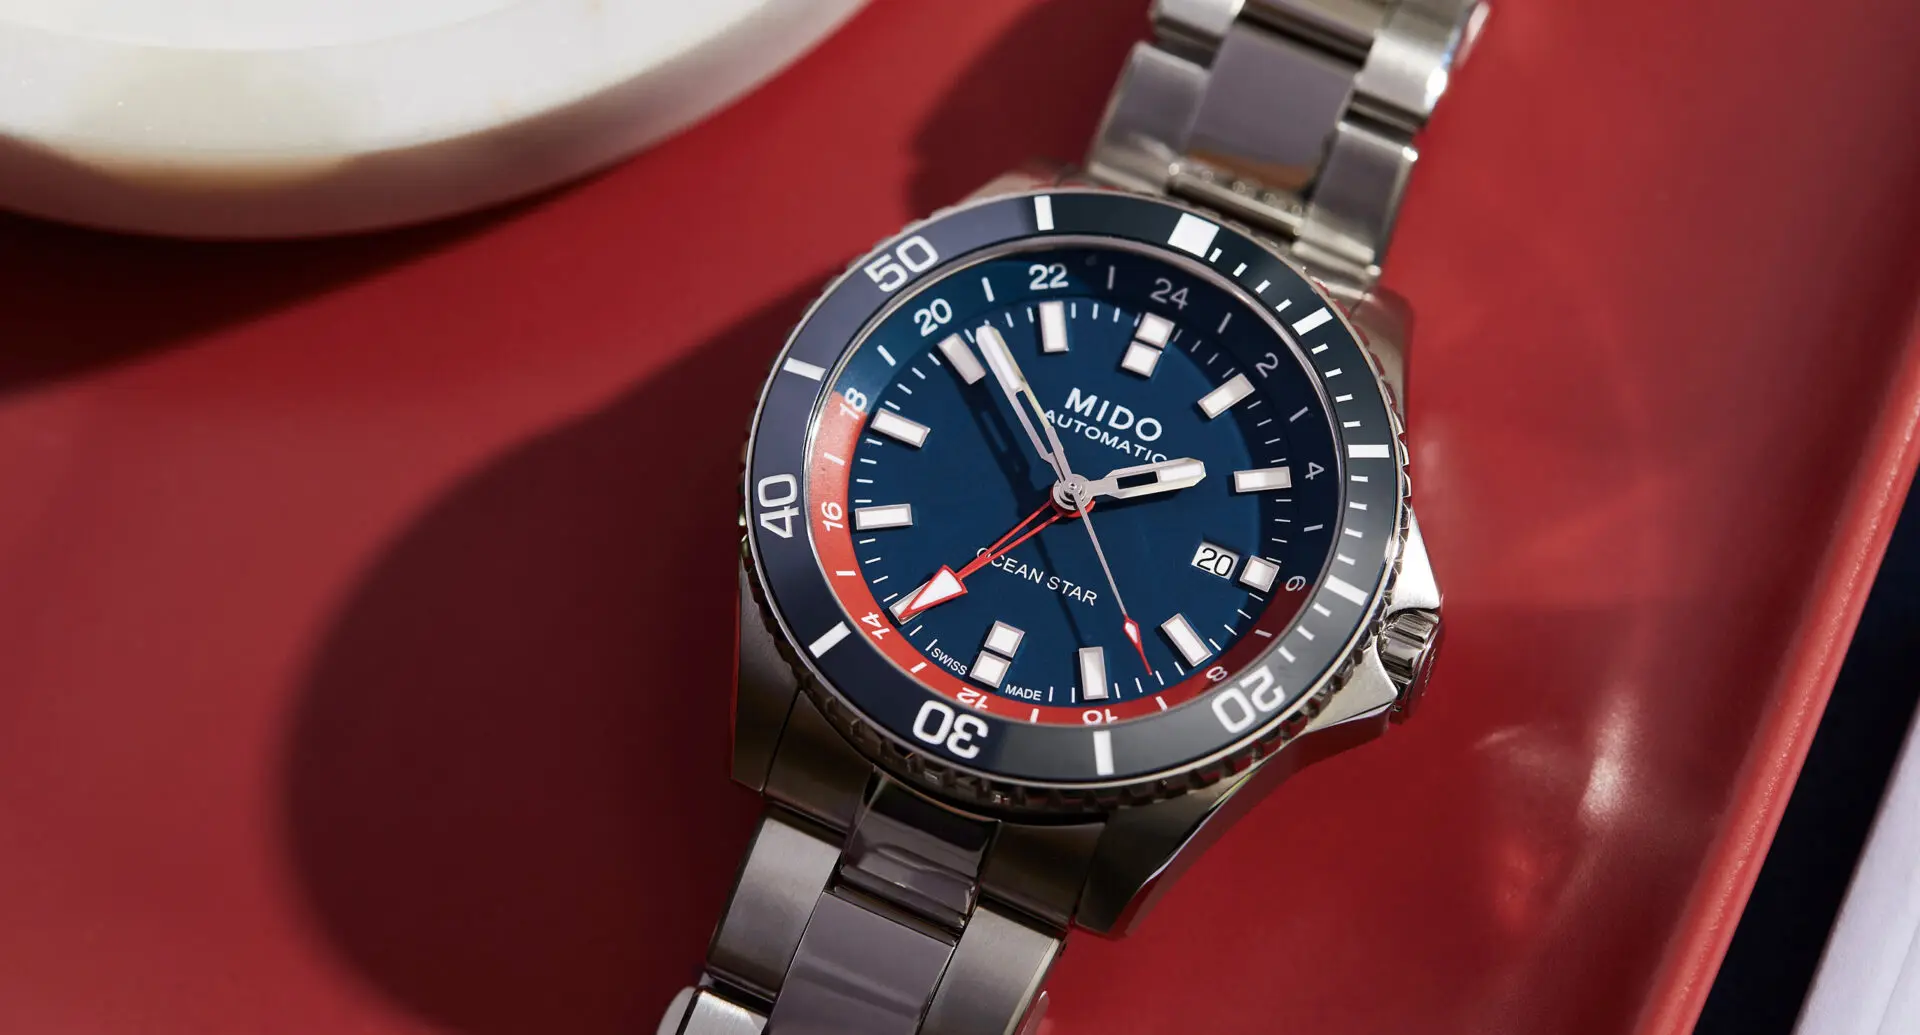 HANDS-ON: The Mido Ocean Star GMT Special Edition